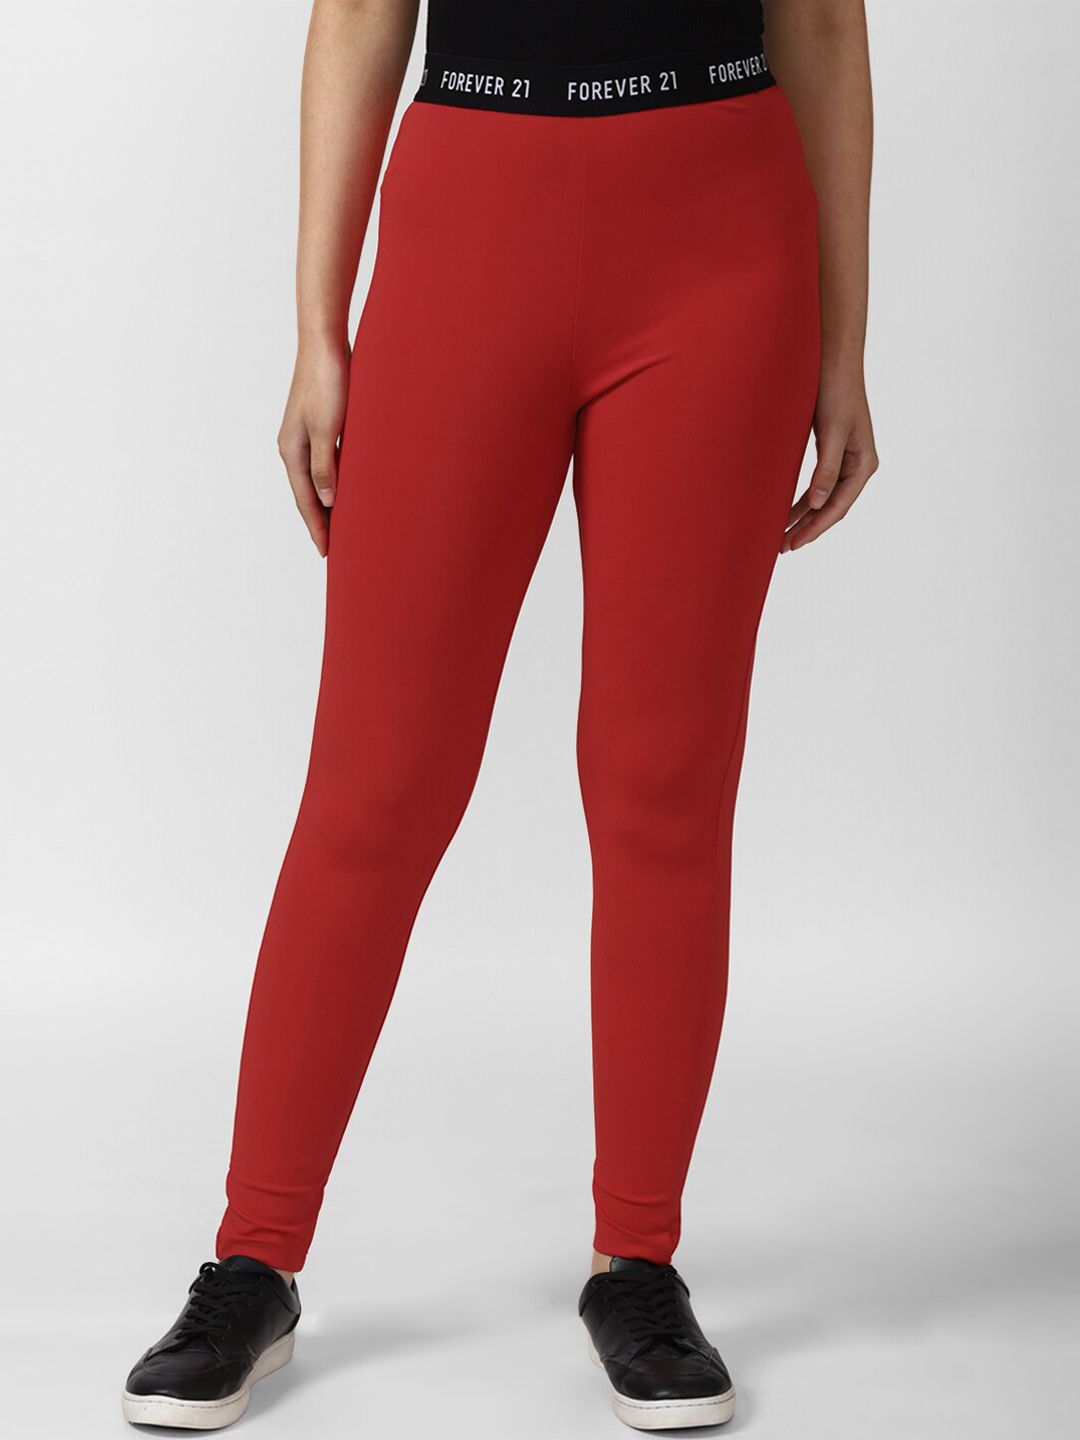 FOREVER 21 Women Red Solid Tights Price in India